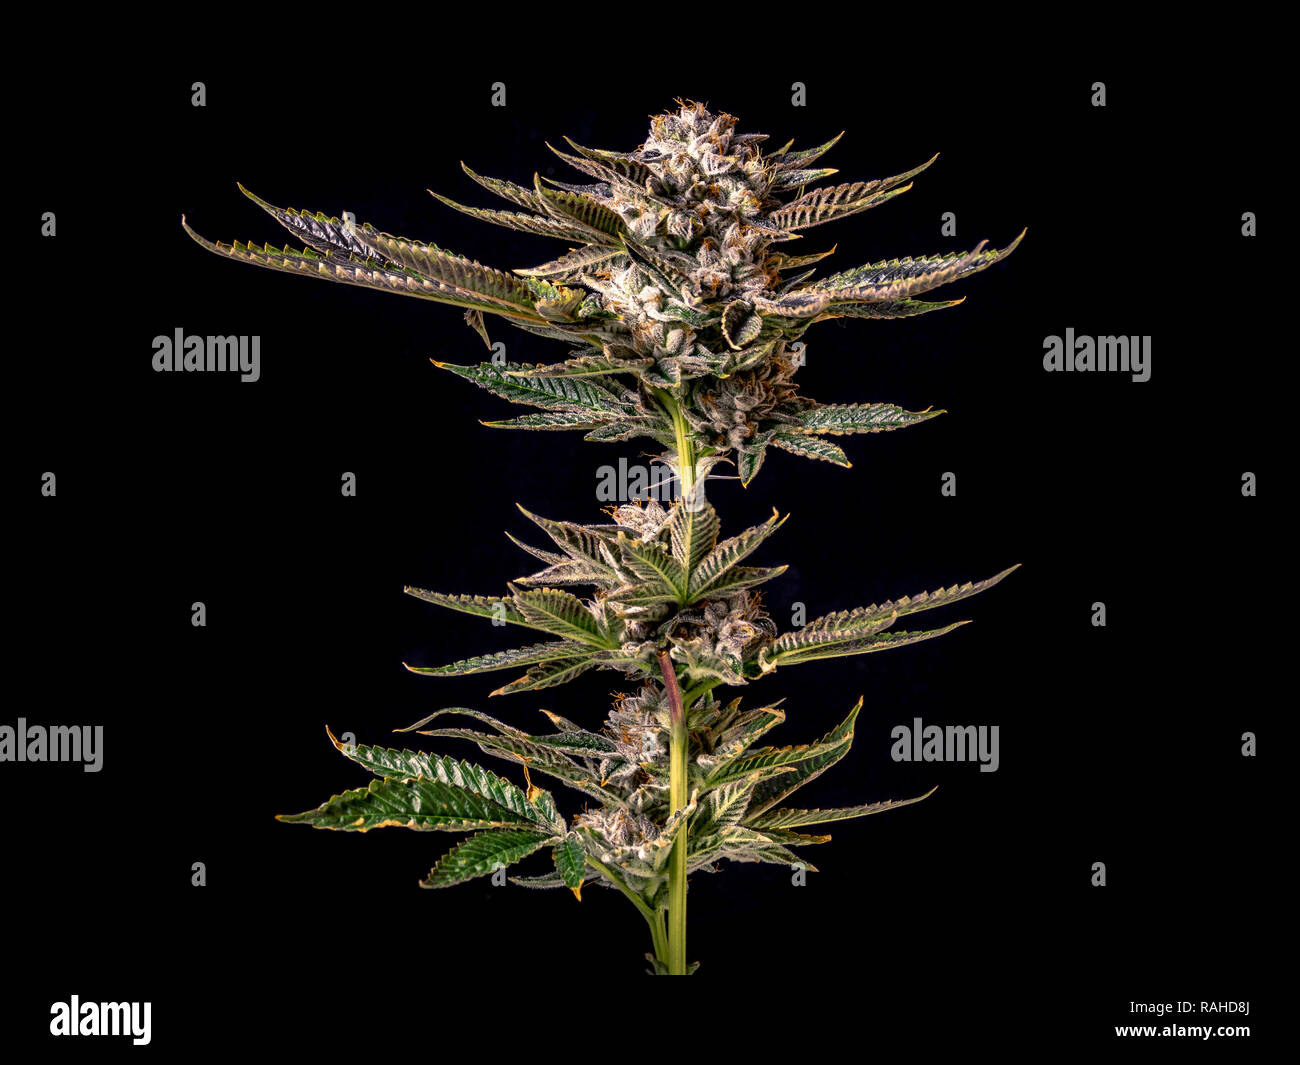 Beautiful cannabis grown indoors diplayed in studio lighting with green and purple colors Stock Photo